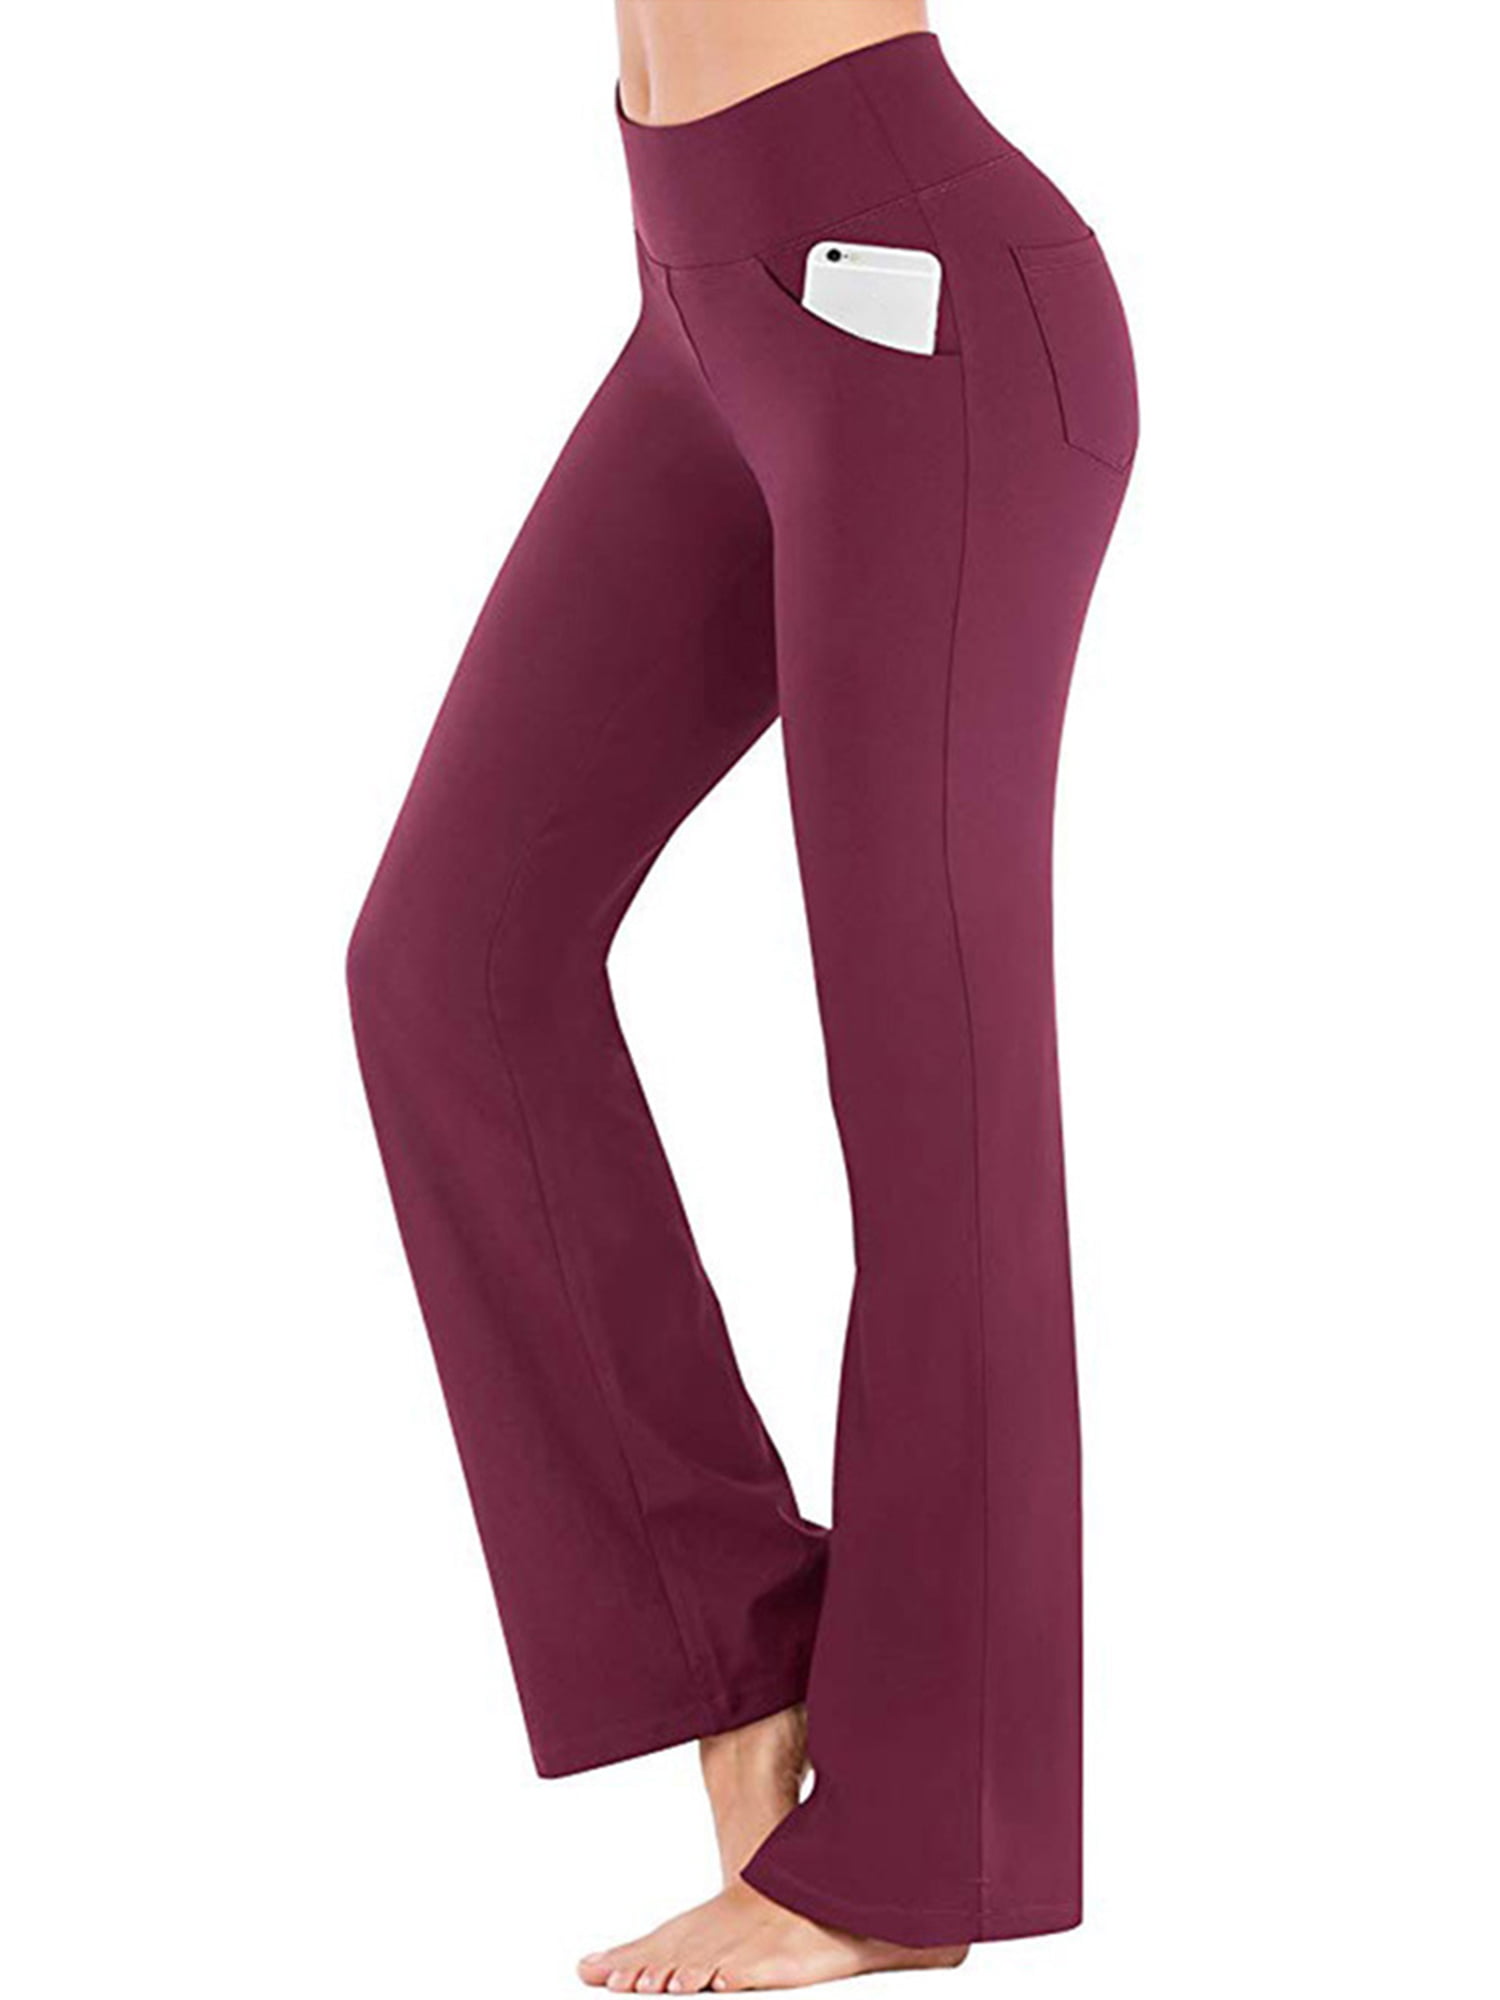 15 Minute Moisture Wicking Workout Pants with Comfort Workout Clothes